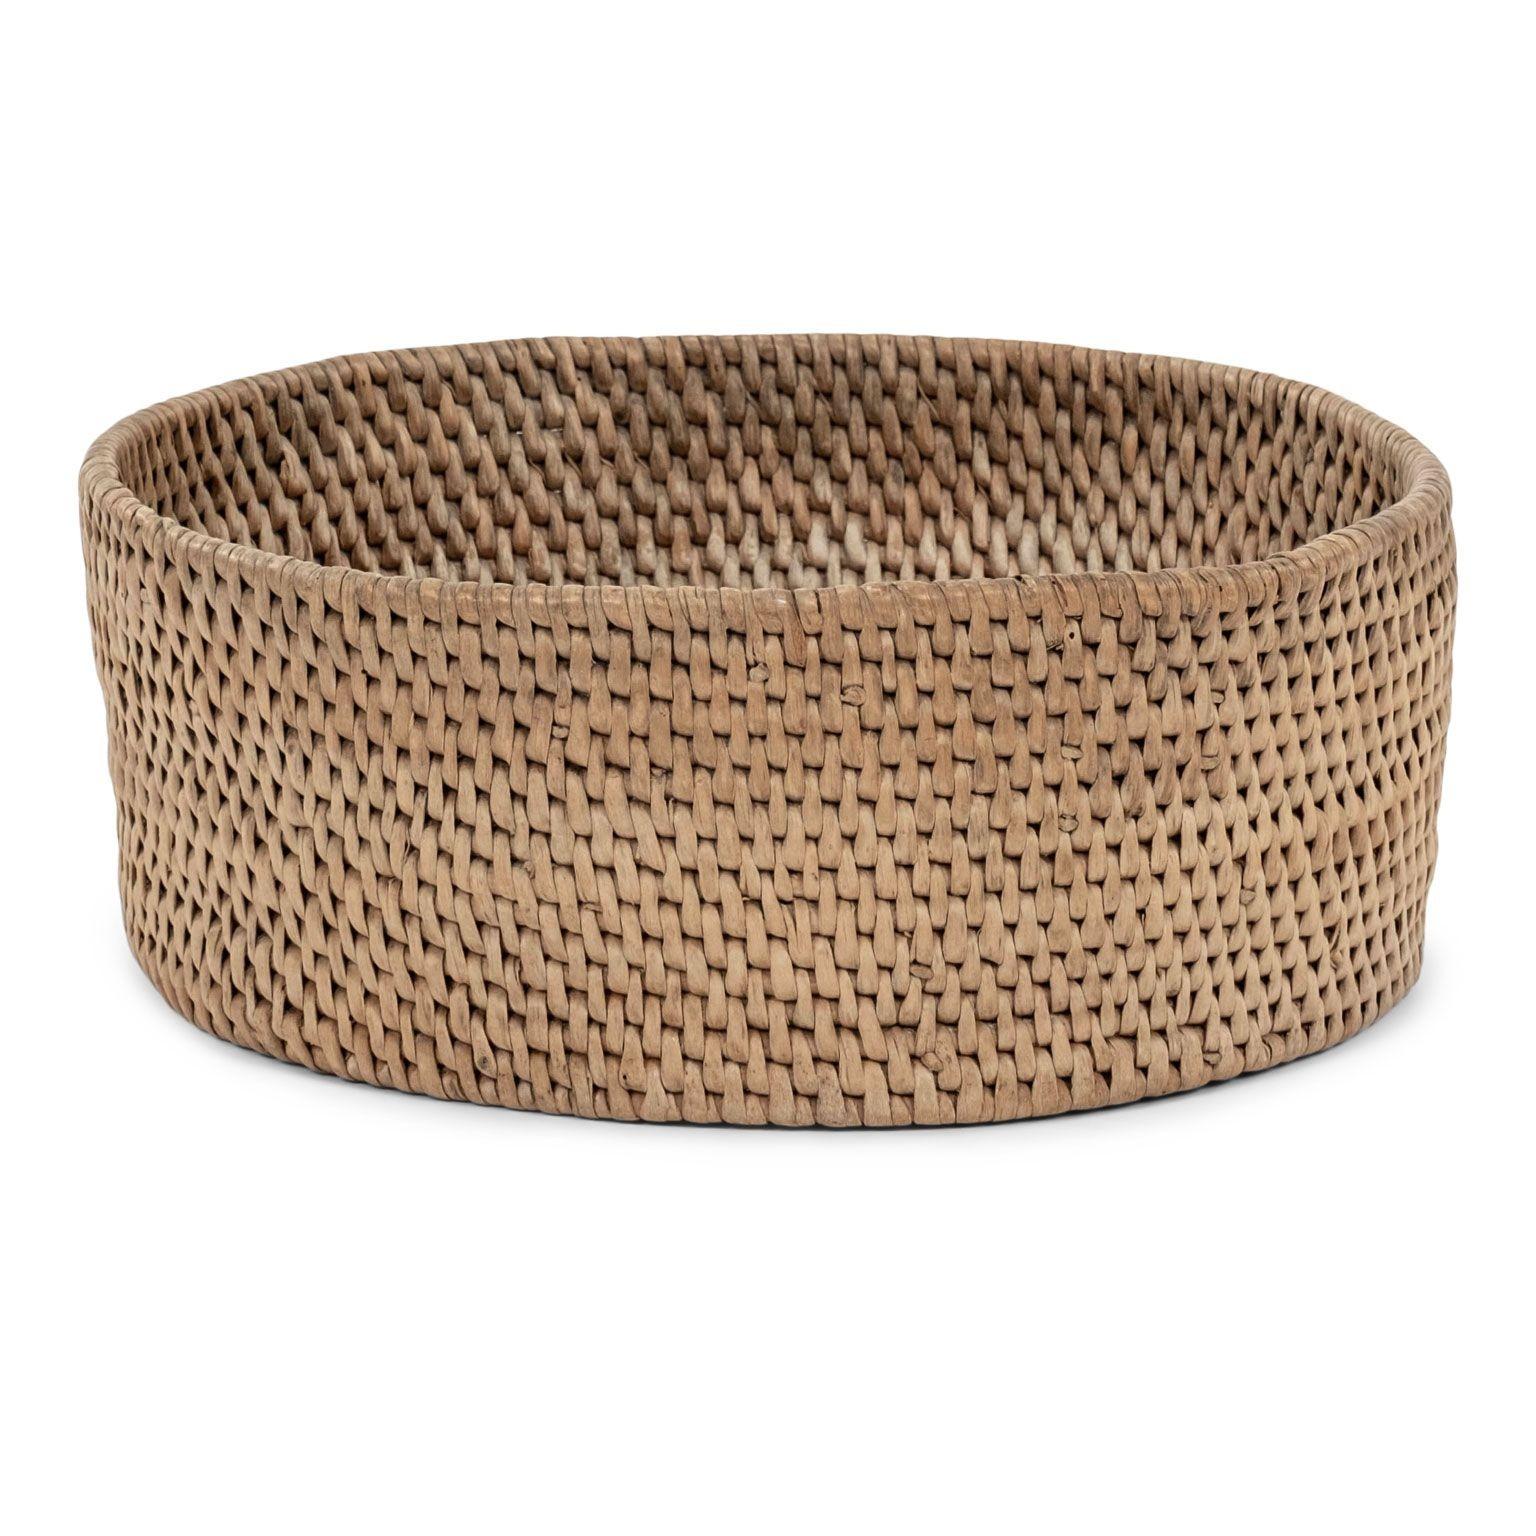 Folk Art Collection of Round Finely Woven-Birch Swedish Cheese Baskets For Sale